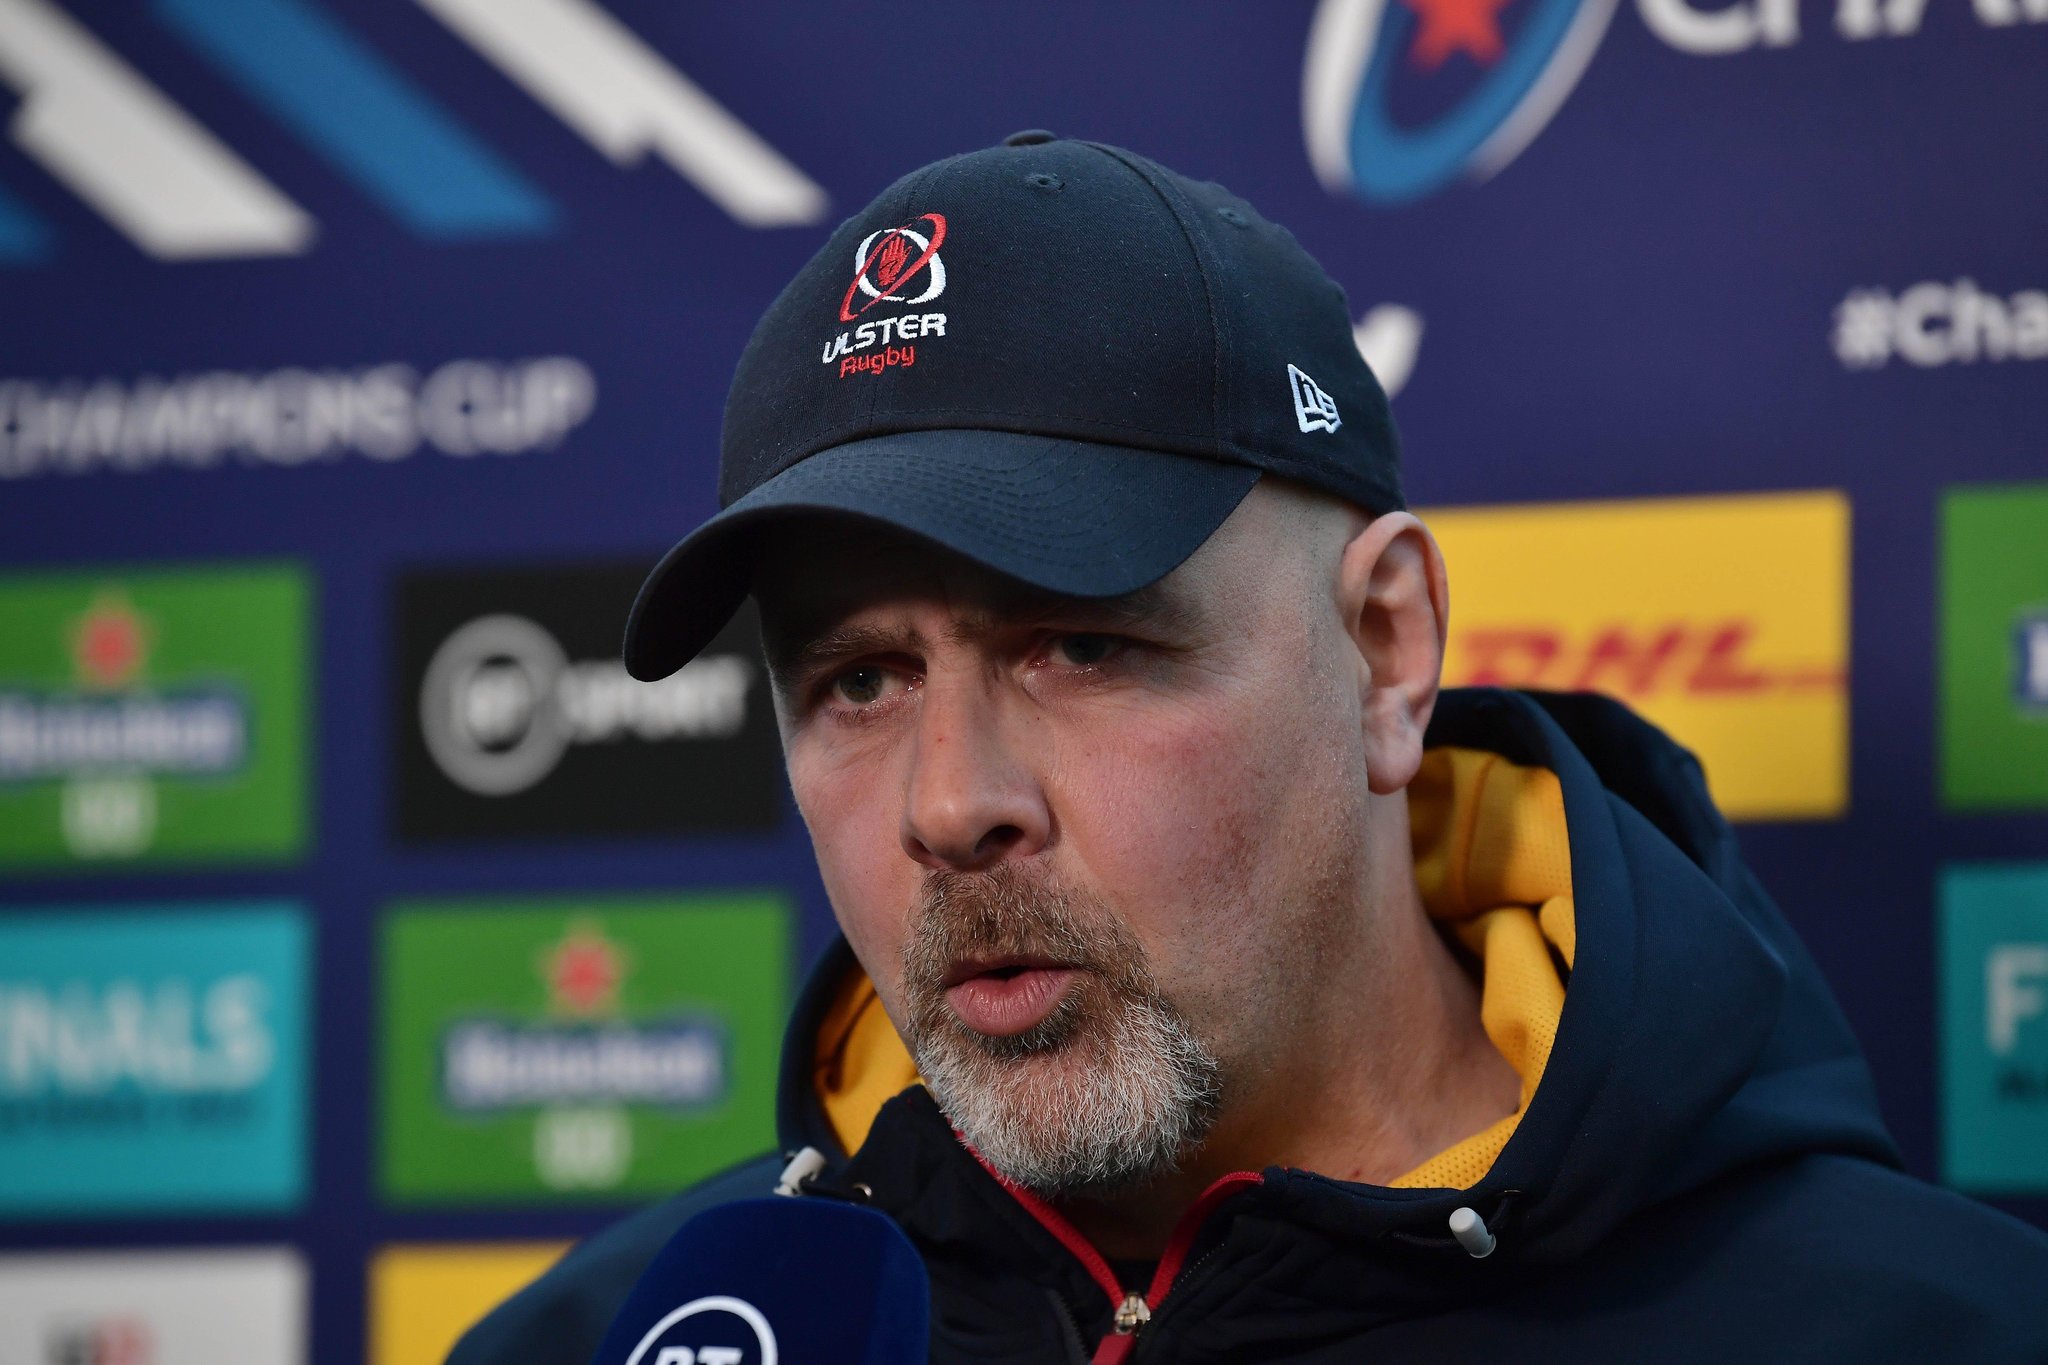 Ulster ready for new challenge